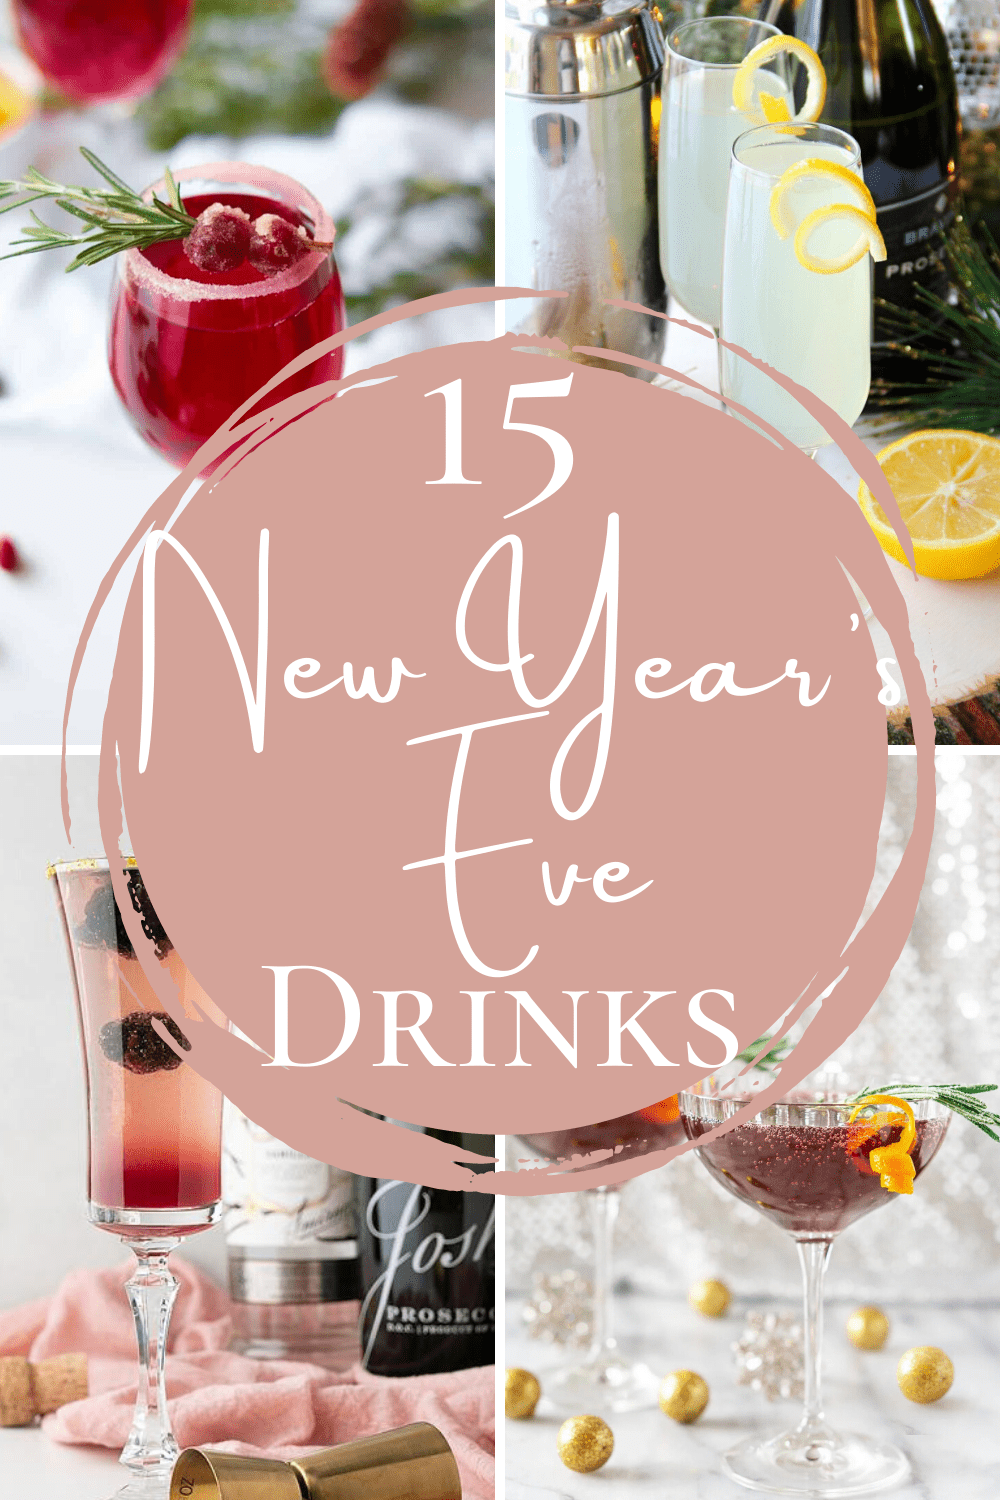 New Year’s Drink Recipes collage of 4 images